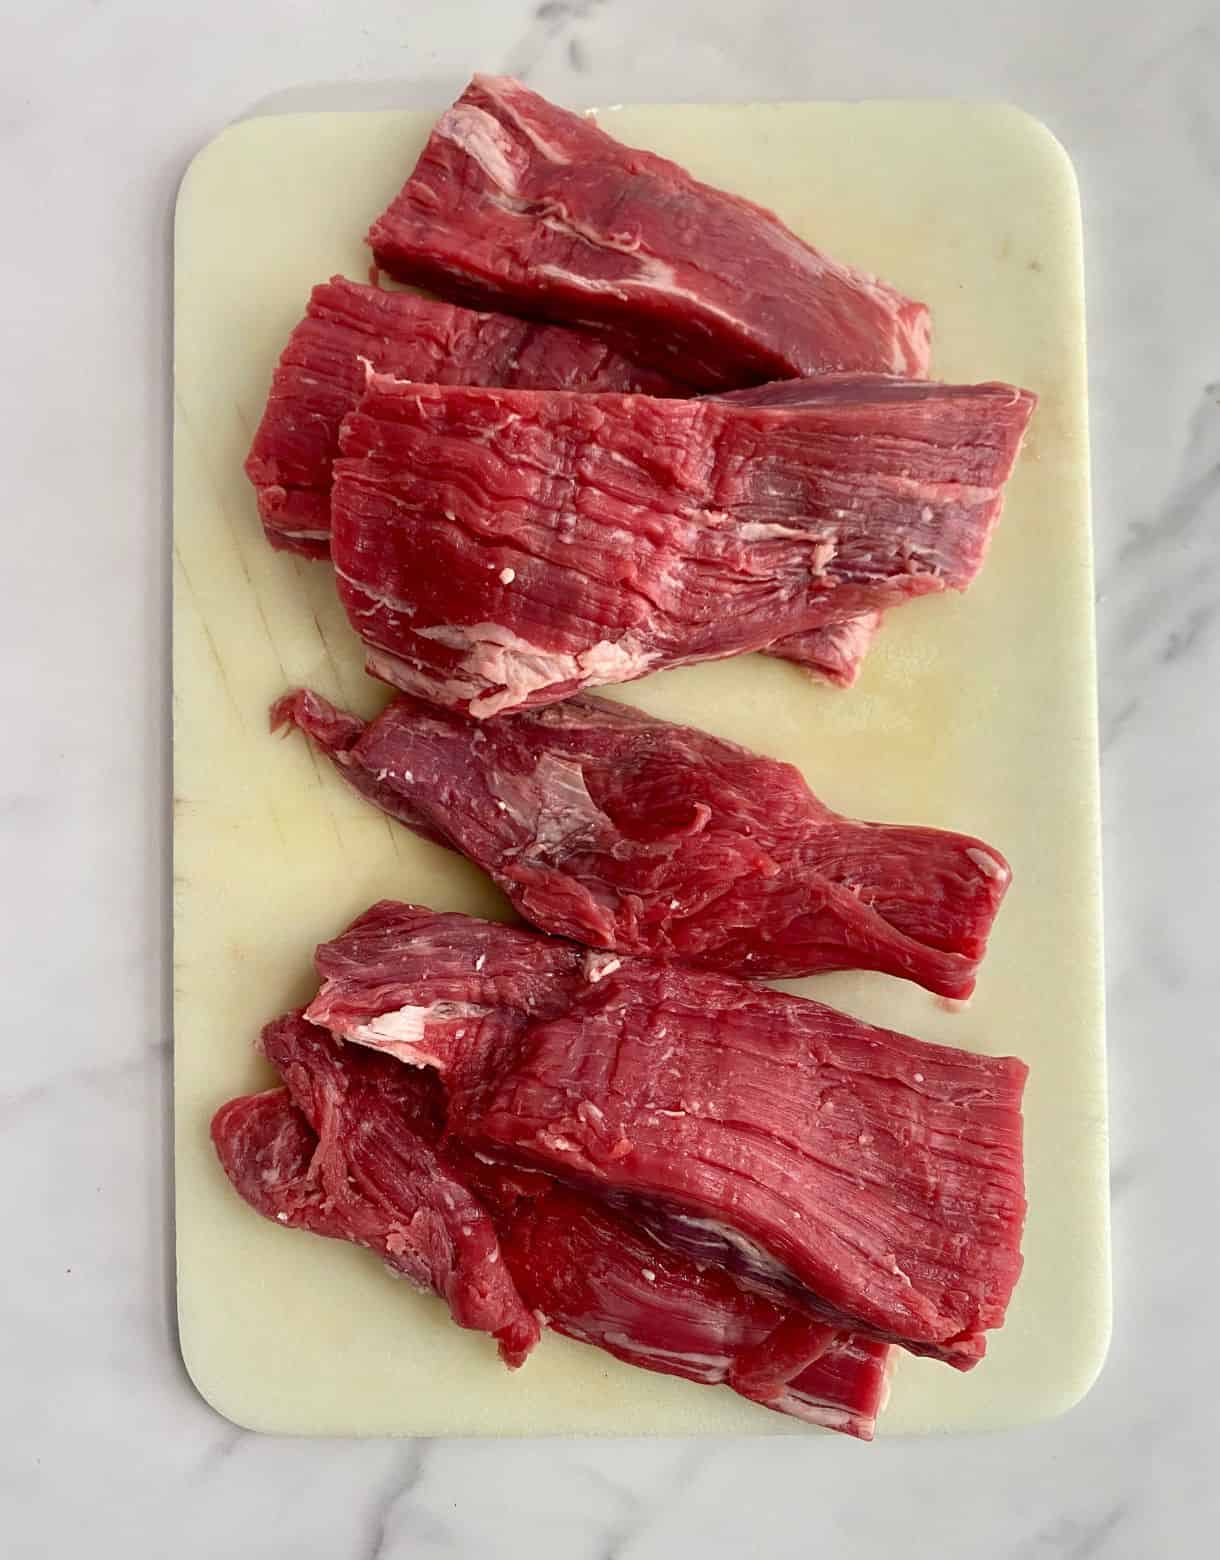 Flank steak on a cutting board cut into 6 large pieces for Pulled Beef Tacos.